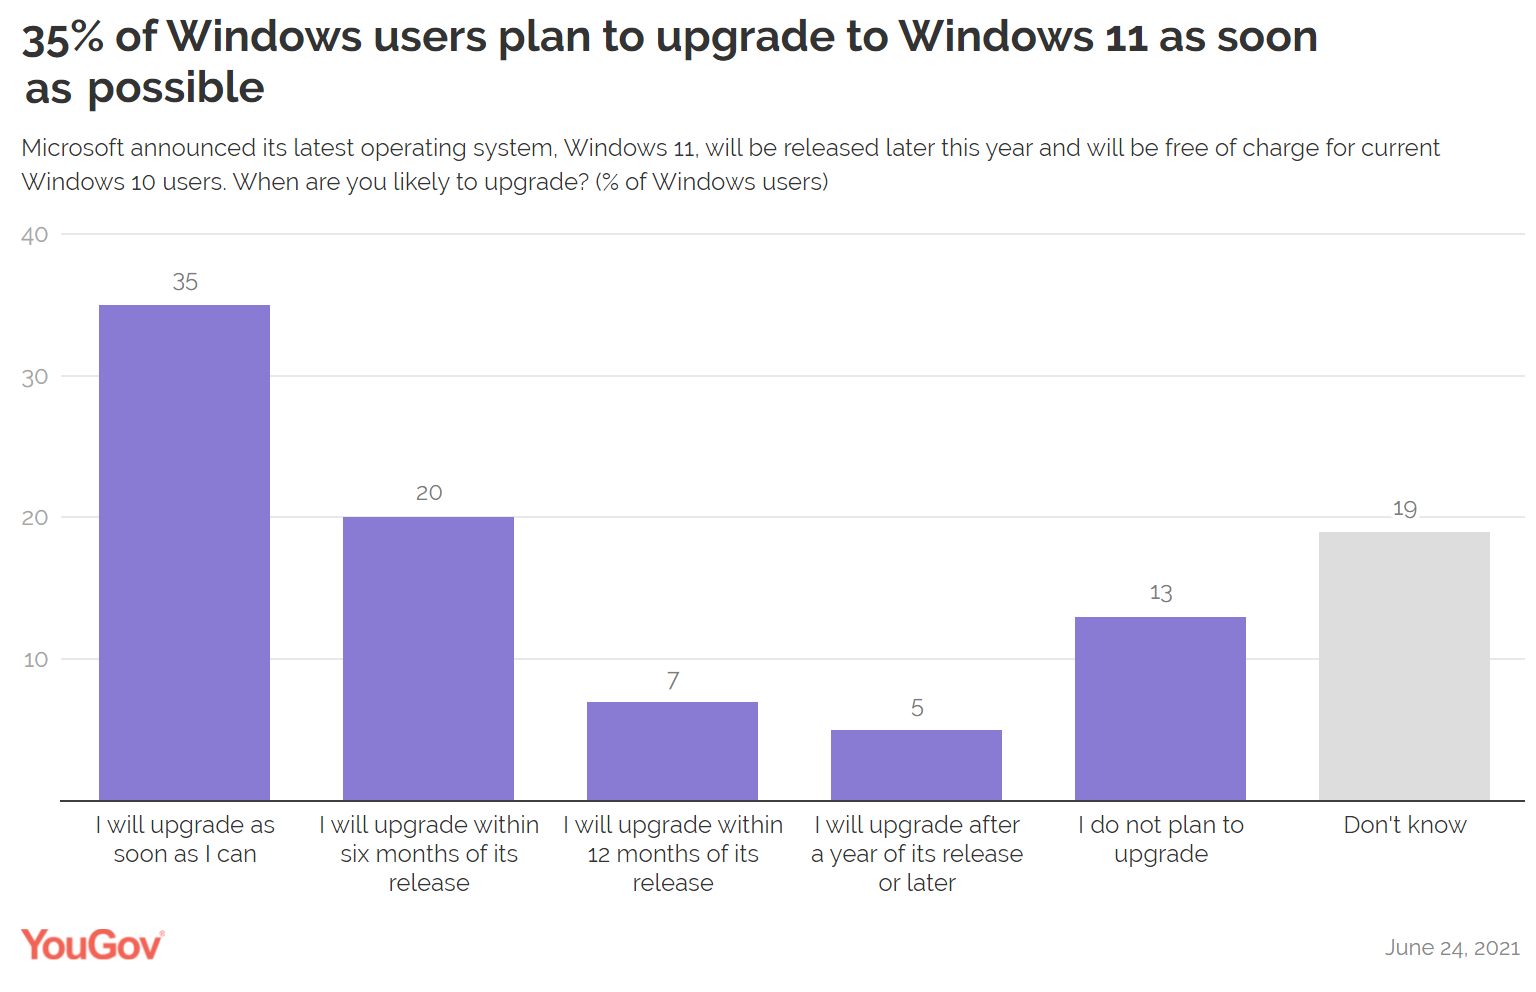 35-percent-of-windows-users-plan-to-upgrade-to-windows-11-as-soon-as-possible